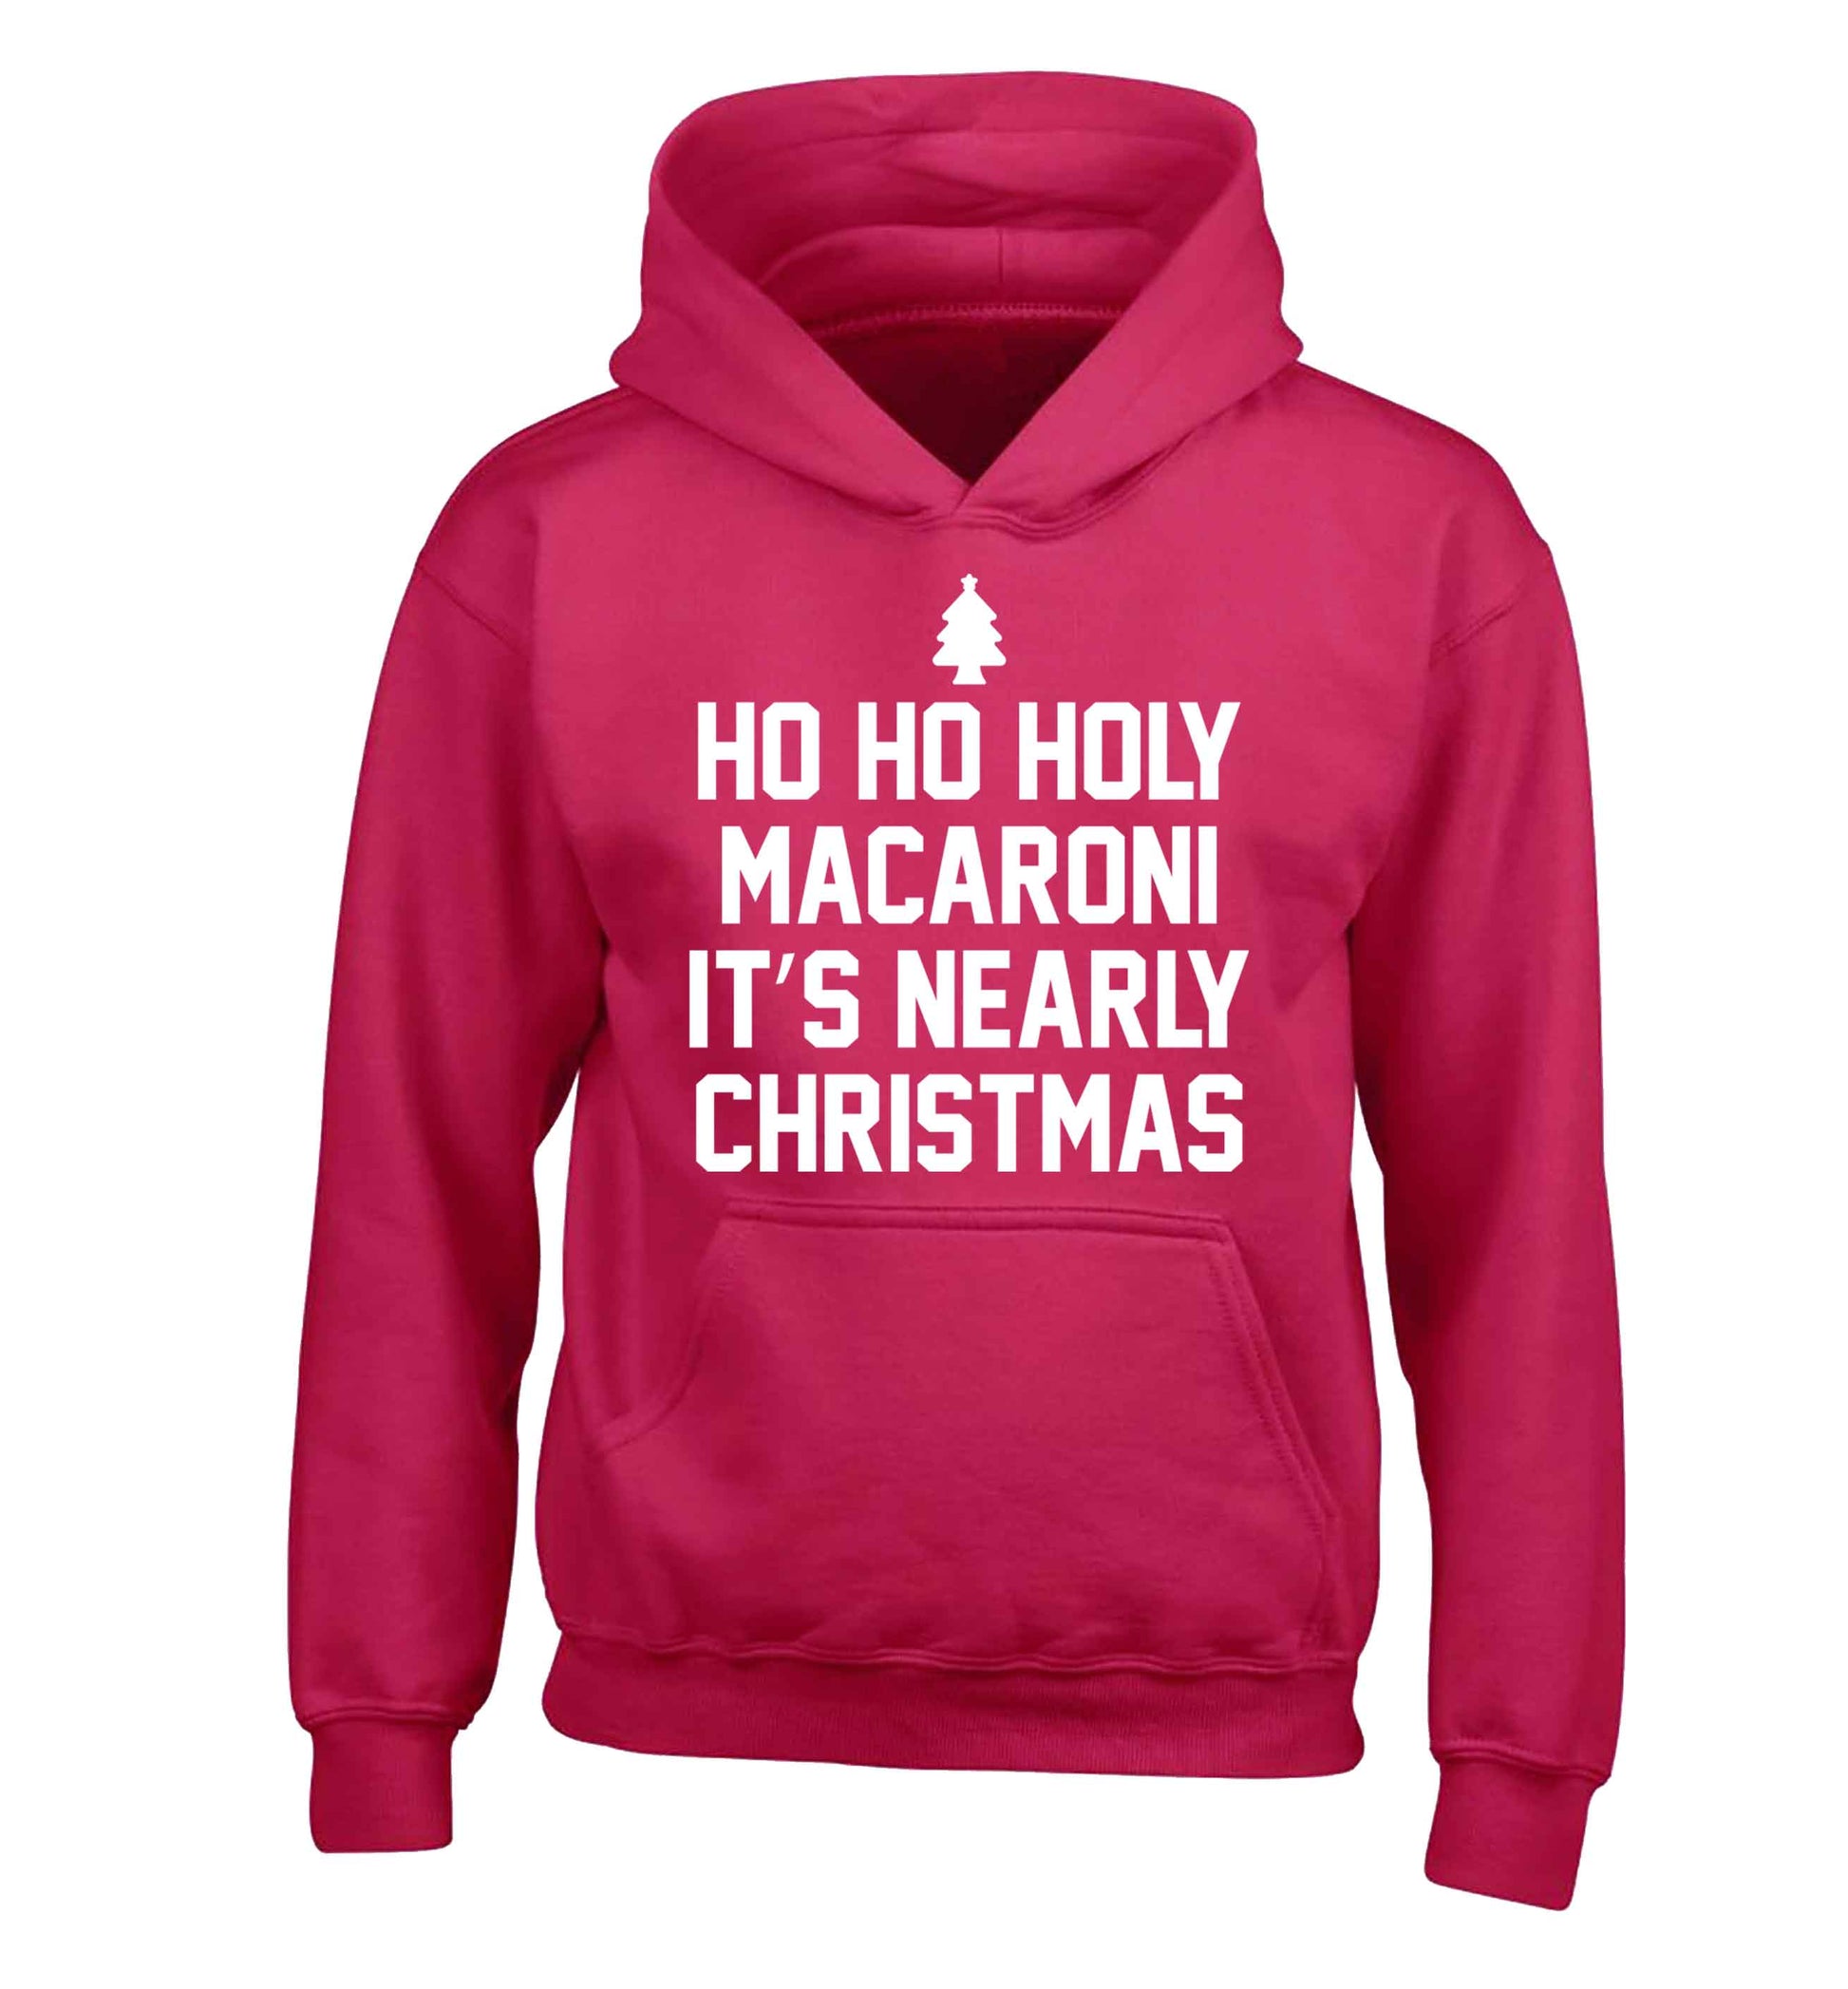 Ho ho holy macaroni it's nearly Christmas children's pink hoodie 12-13 Years